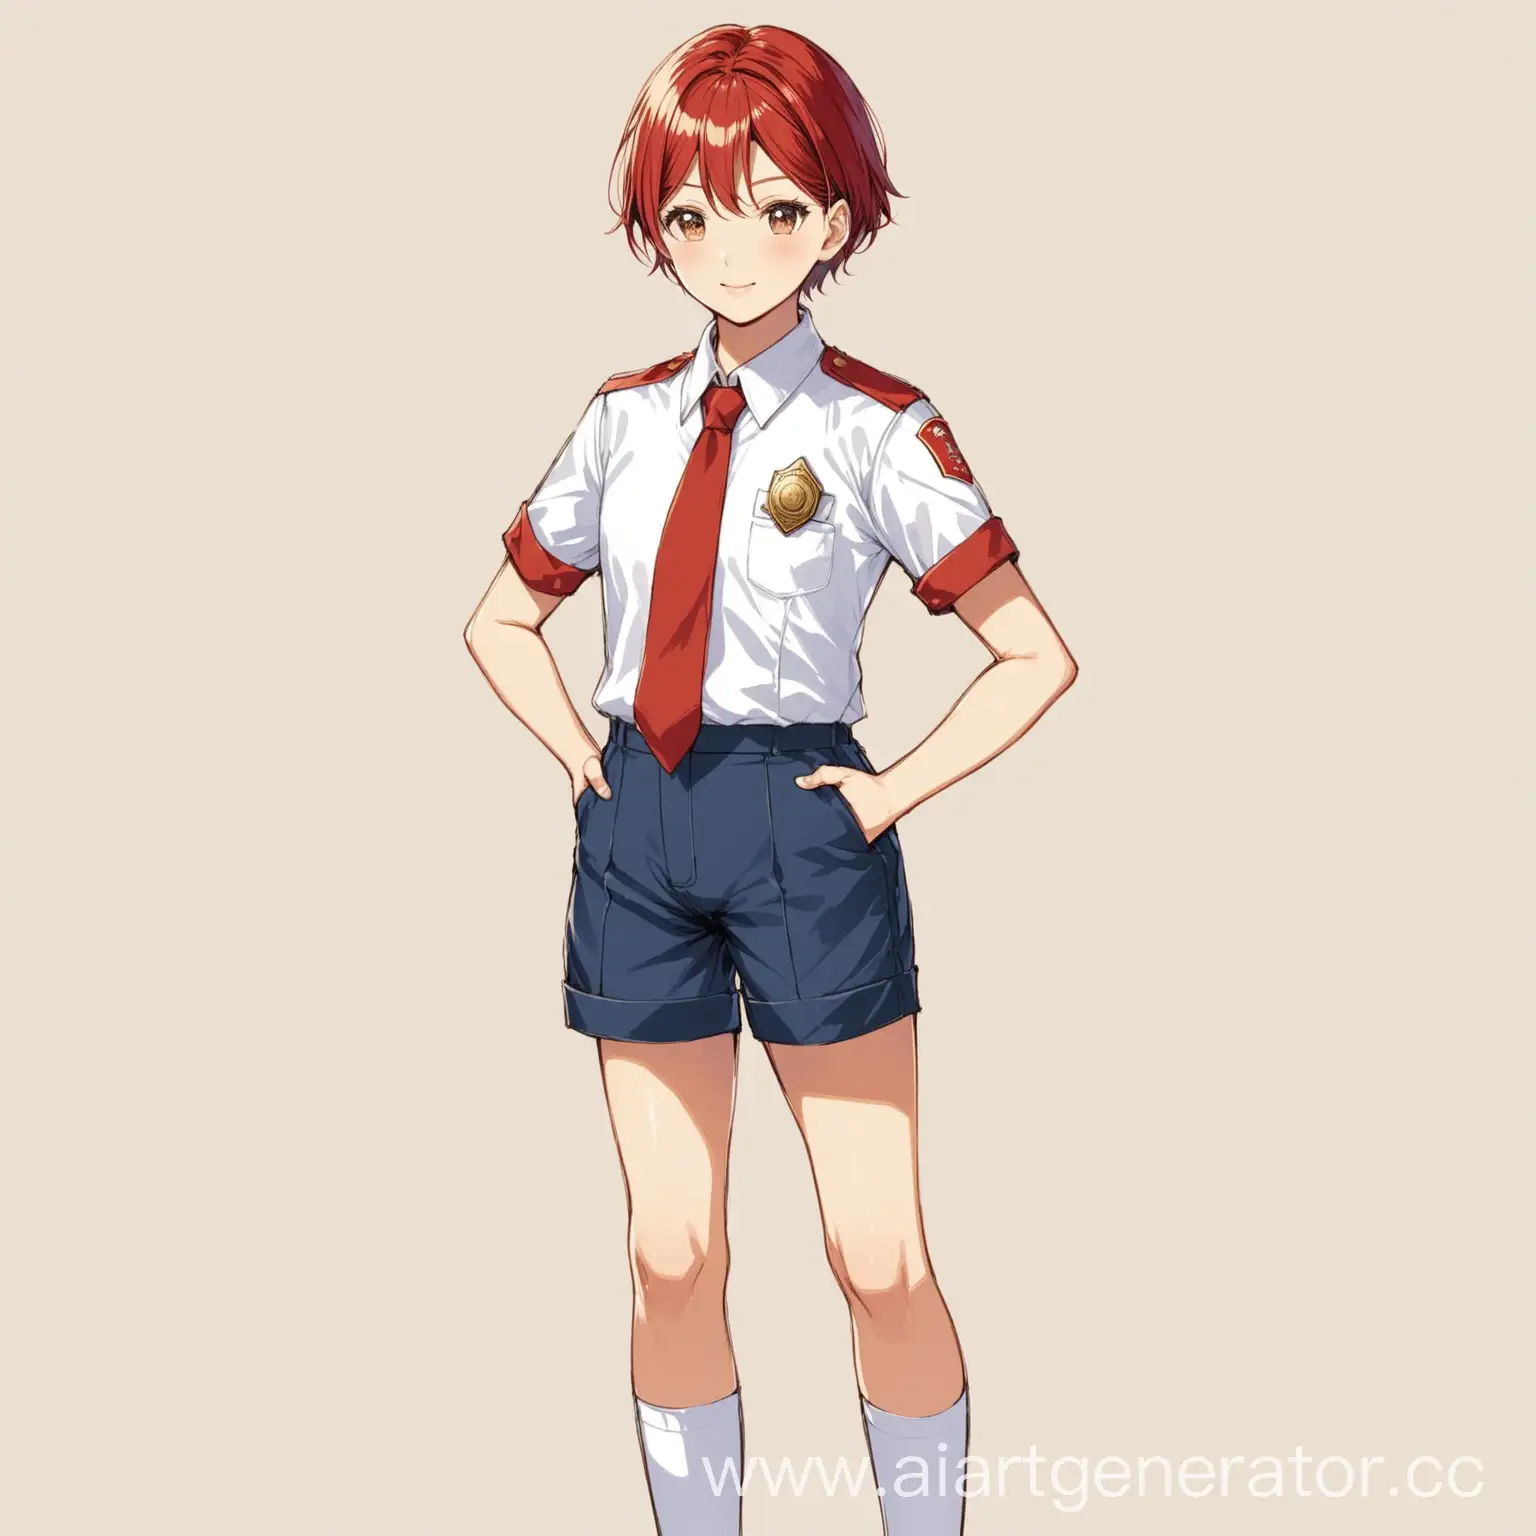 Pioneer-in-Summer-Uniform-with-Shorts-Shirt-Red-Tie-and-Badges